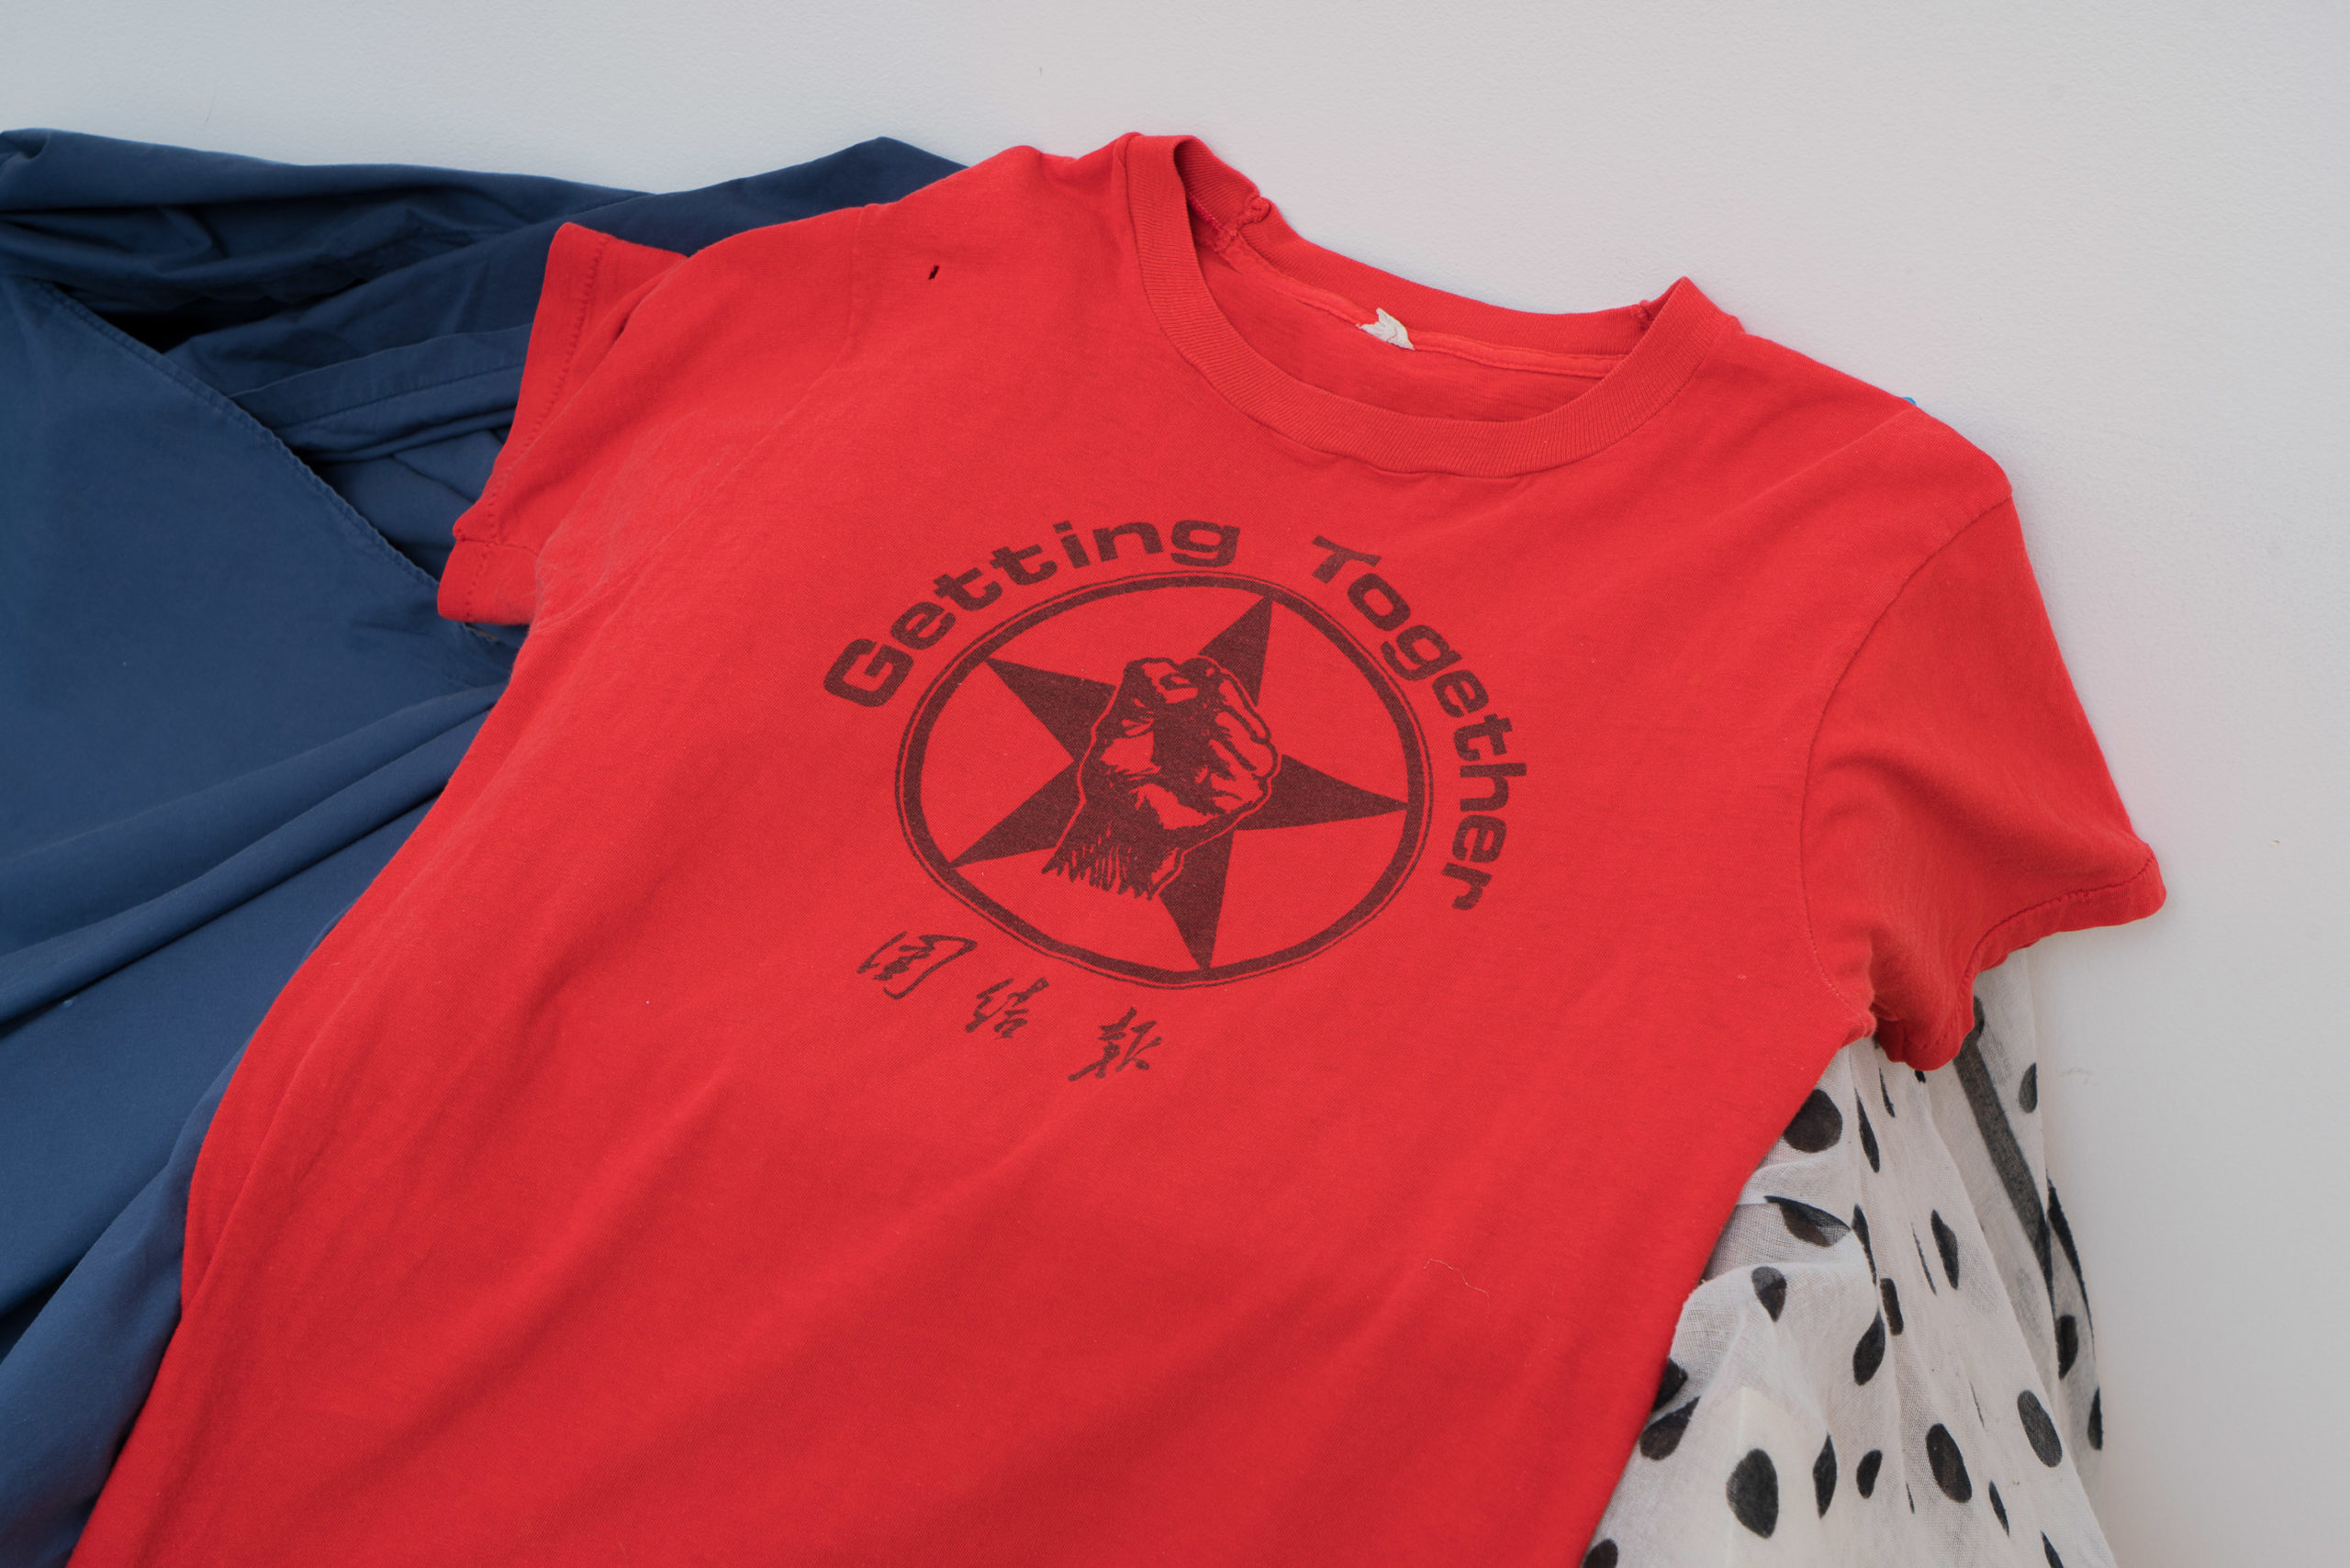 Getting Together tee shirt, scarf